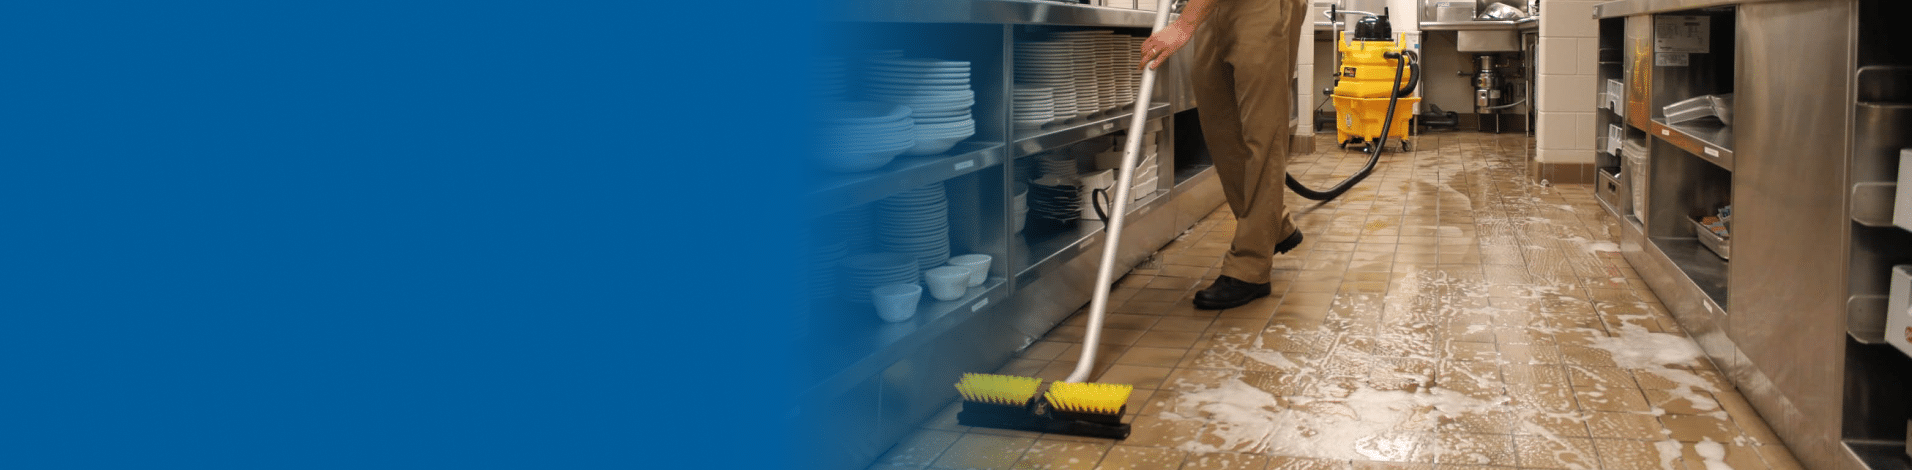 Kitchen Deep Cleaning Services